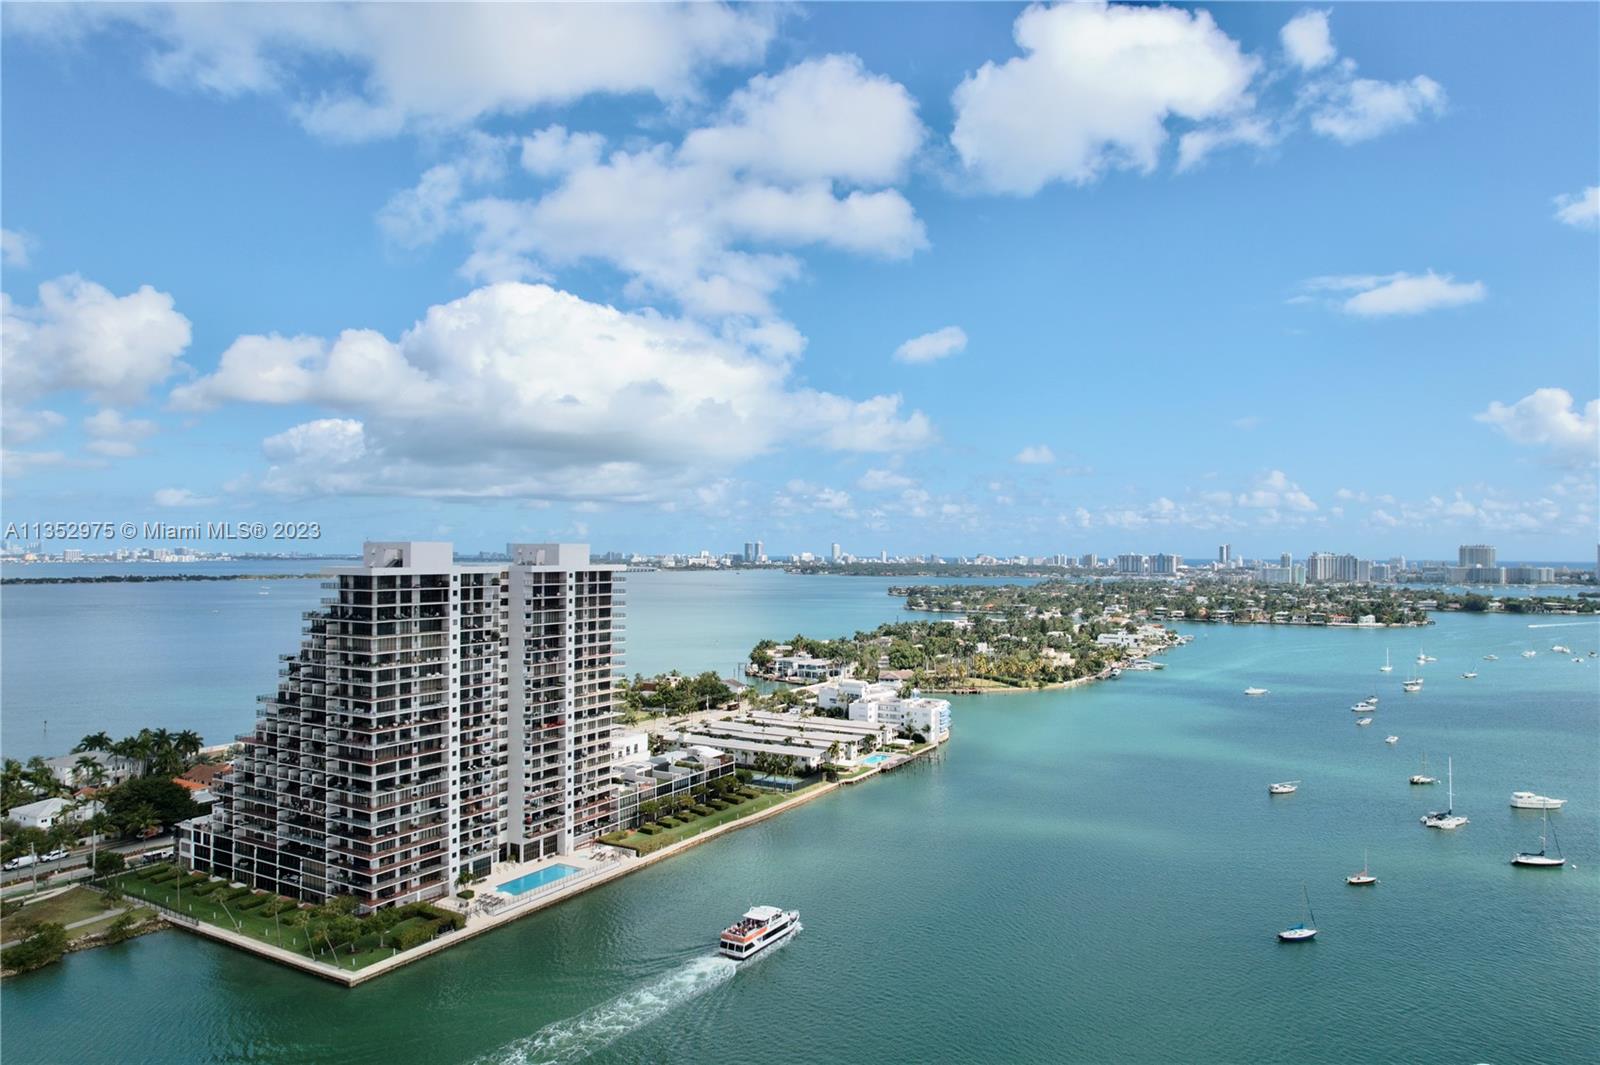 Stunning fully remodeled, custom designed to perfection, 3 bedroom / 3 bathroom condo with beautiful exposure and views, situated in the prestigious Venetian Island. Sitting on the bay between Miami Beach and Downtown, this elegant residence features floor to ceiling windows, 2 oversized terraces with North and South exposure. This full-service luxury building offers two pools, jacuzzi, fitness center, 2 tennis courts, basketball court, children's play area, dog park, gated entry, 24 hour concierge, and security. 2 assigned covered parking spaces. Won't last!